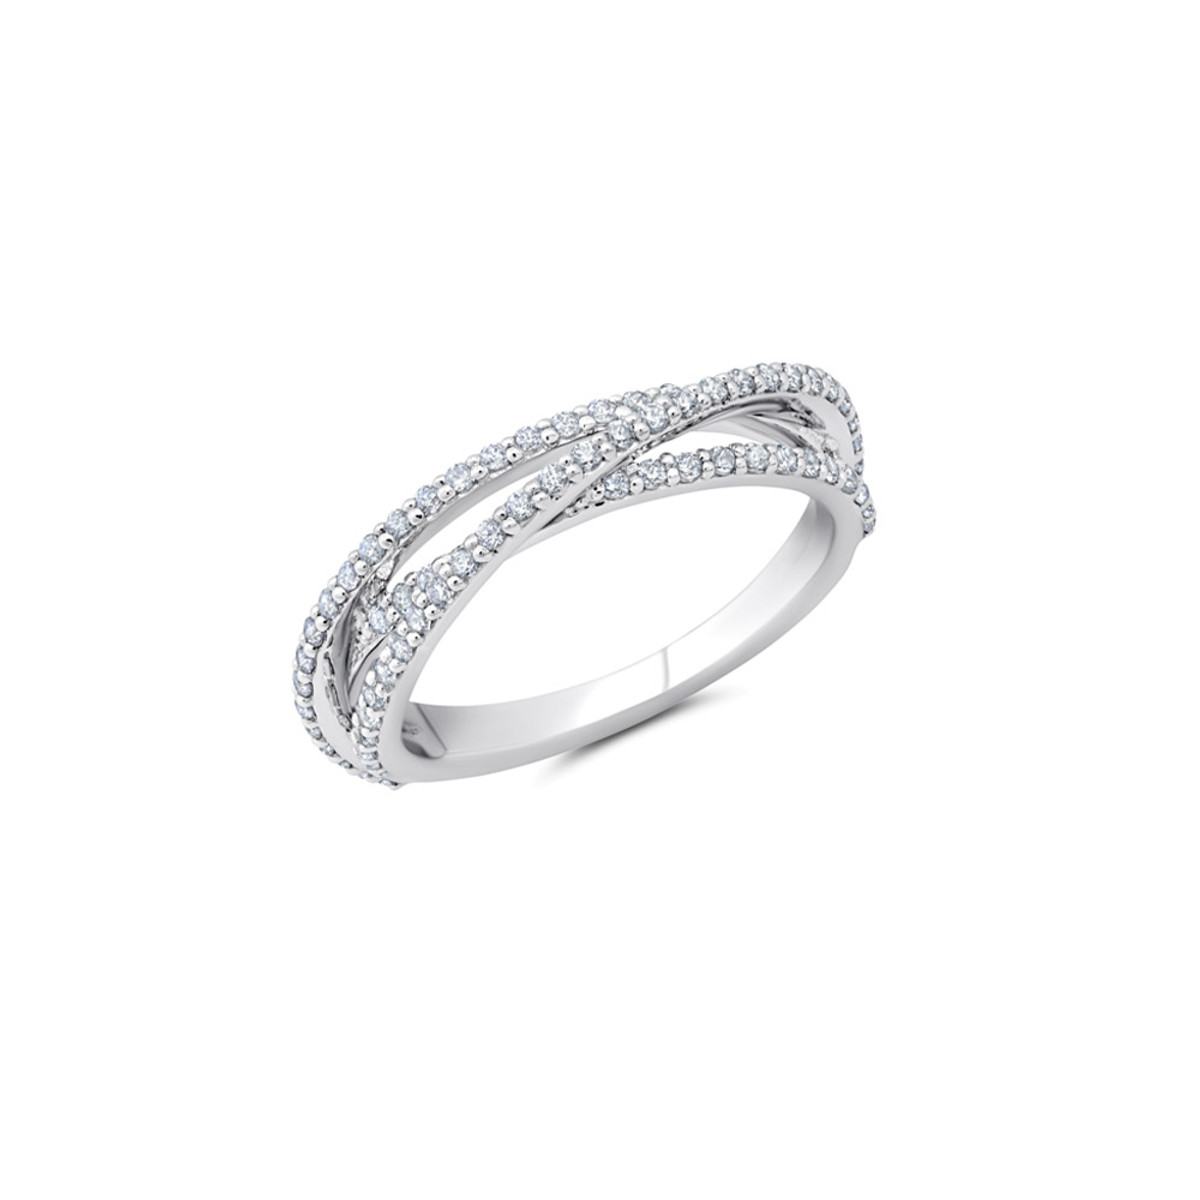 Peter Storm 14K White Gold Crossover Diamond Band-39065 Product Image